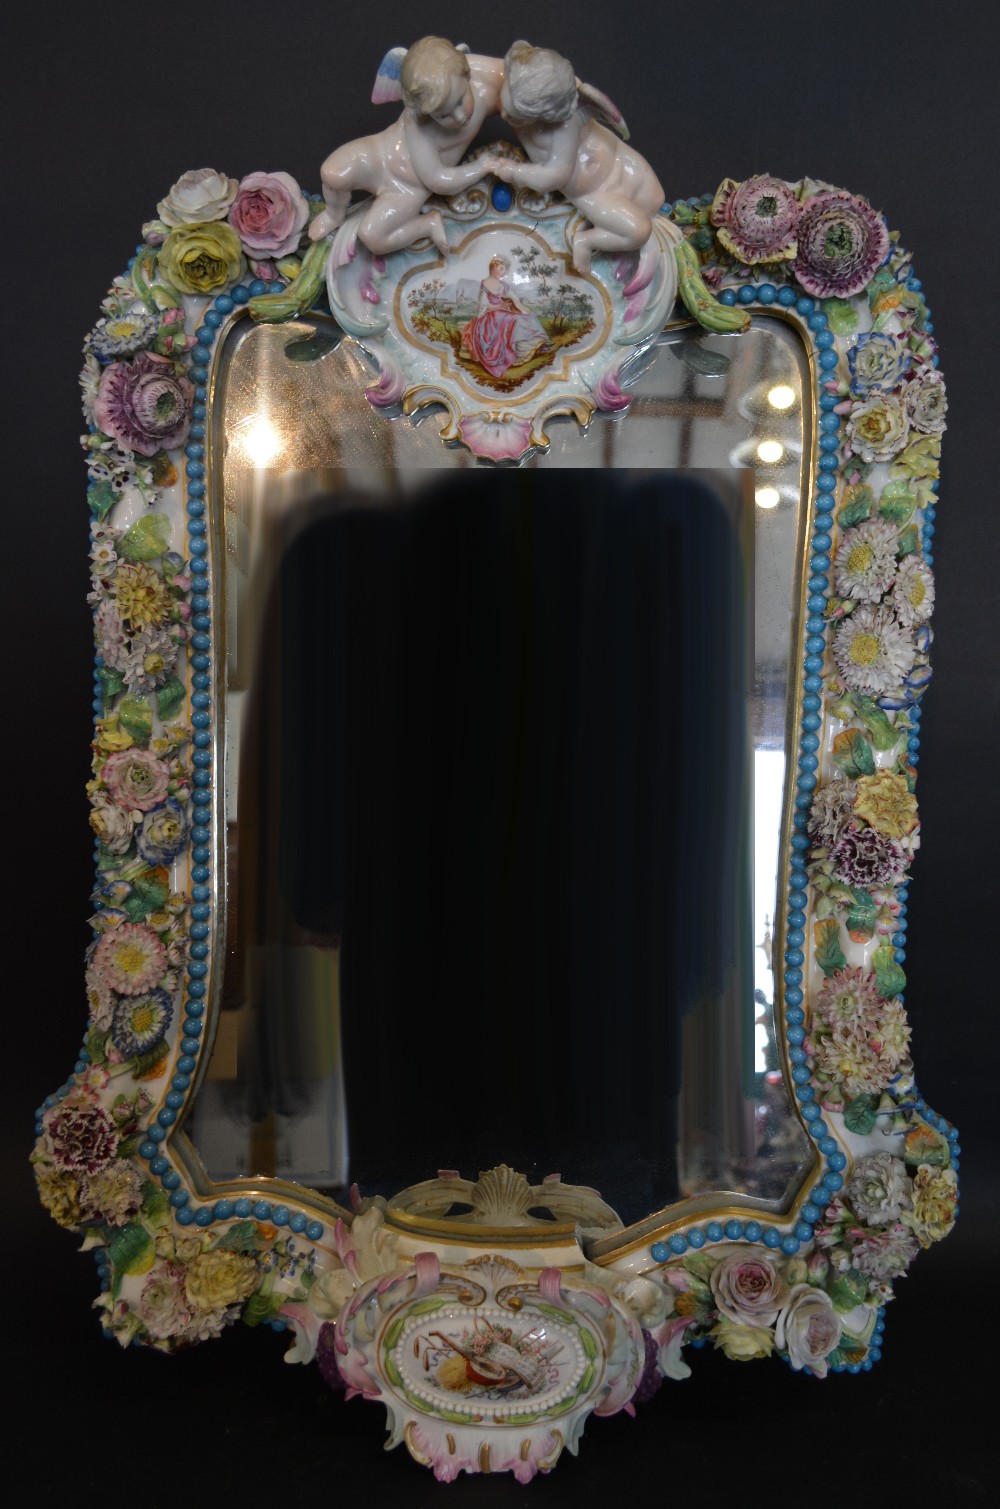 A Meissen Porcelain Large Wall Mirror with Putti Cresting above a cartouche hand painted with a